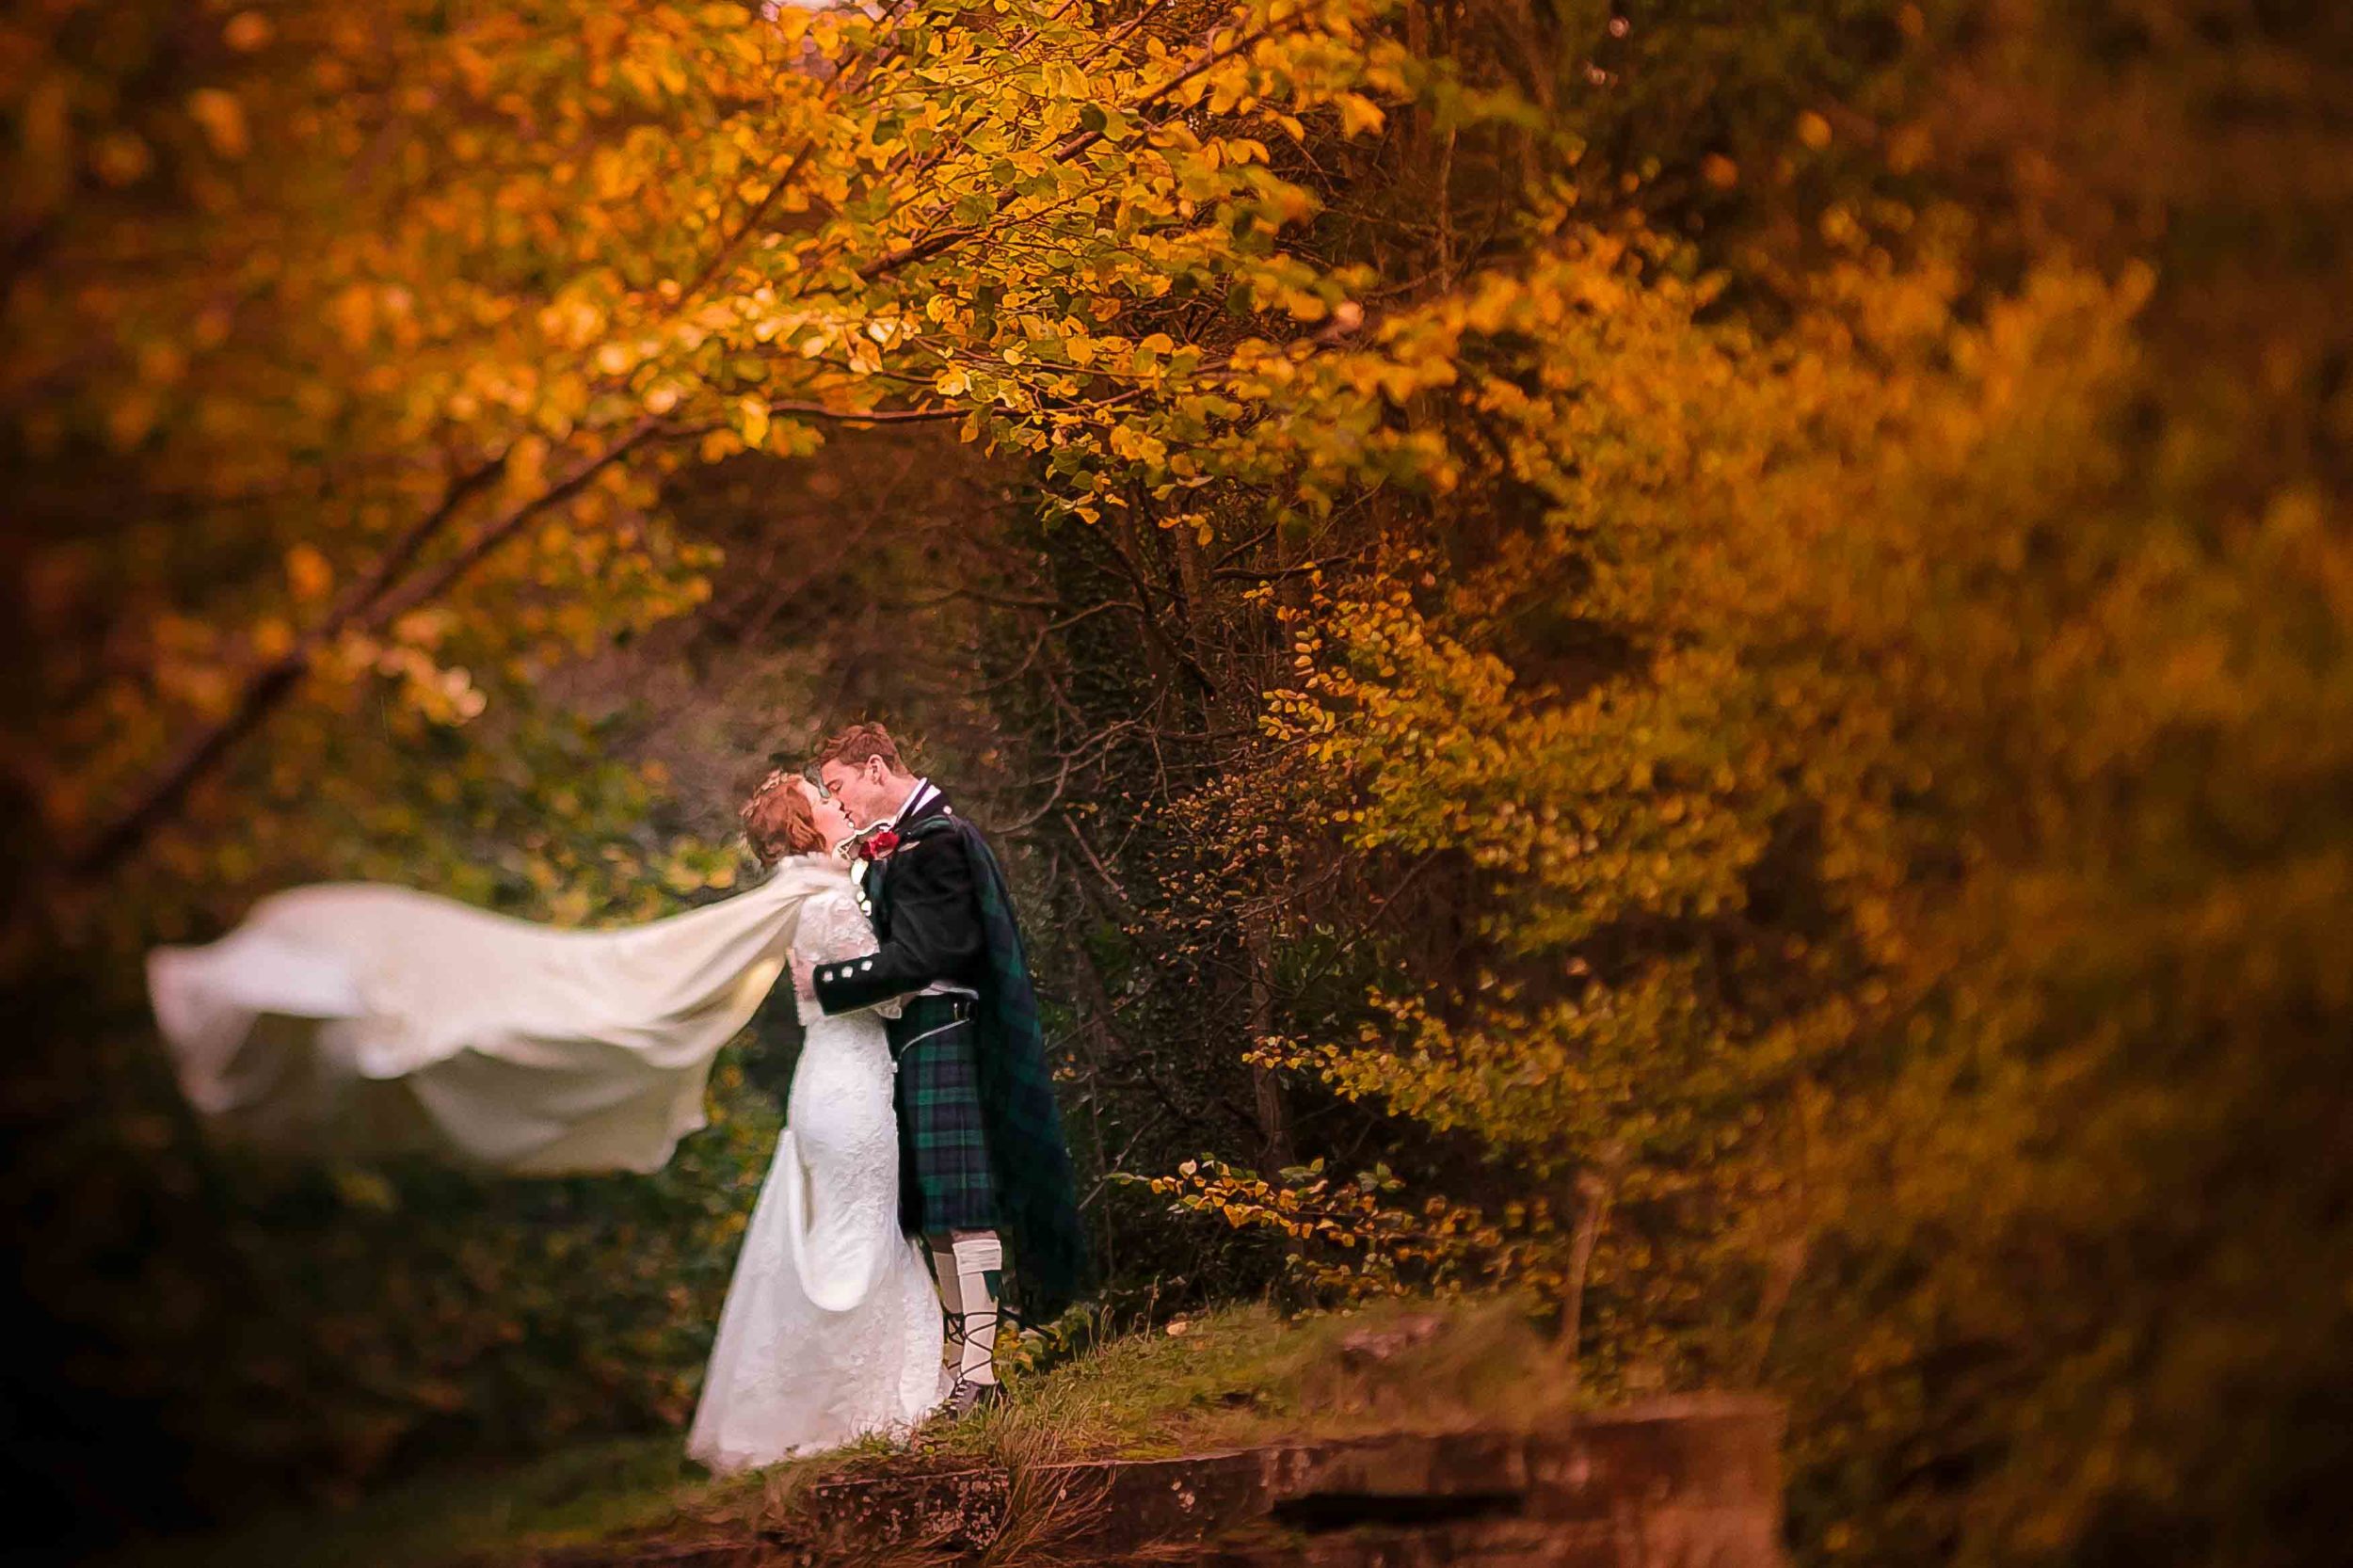 Scottish bride with flowing cape and kilted groom stand beneath orange trees.